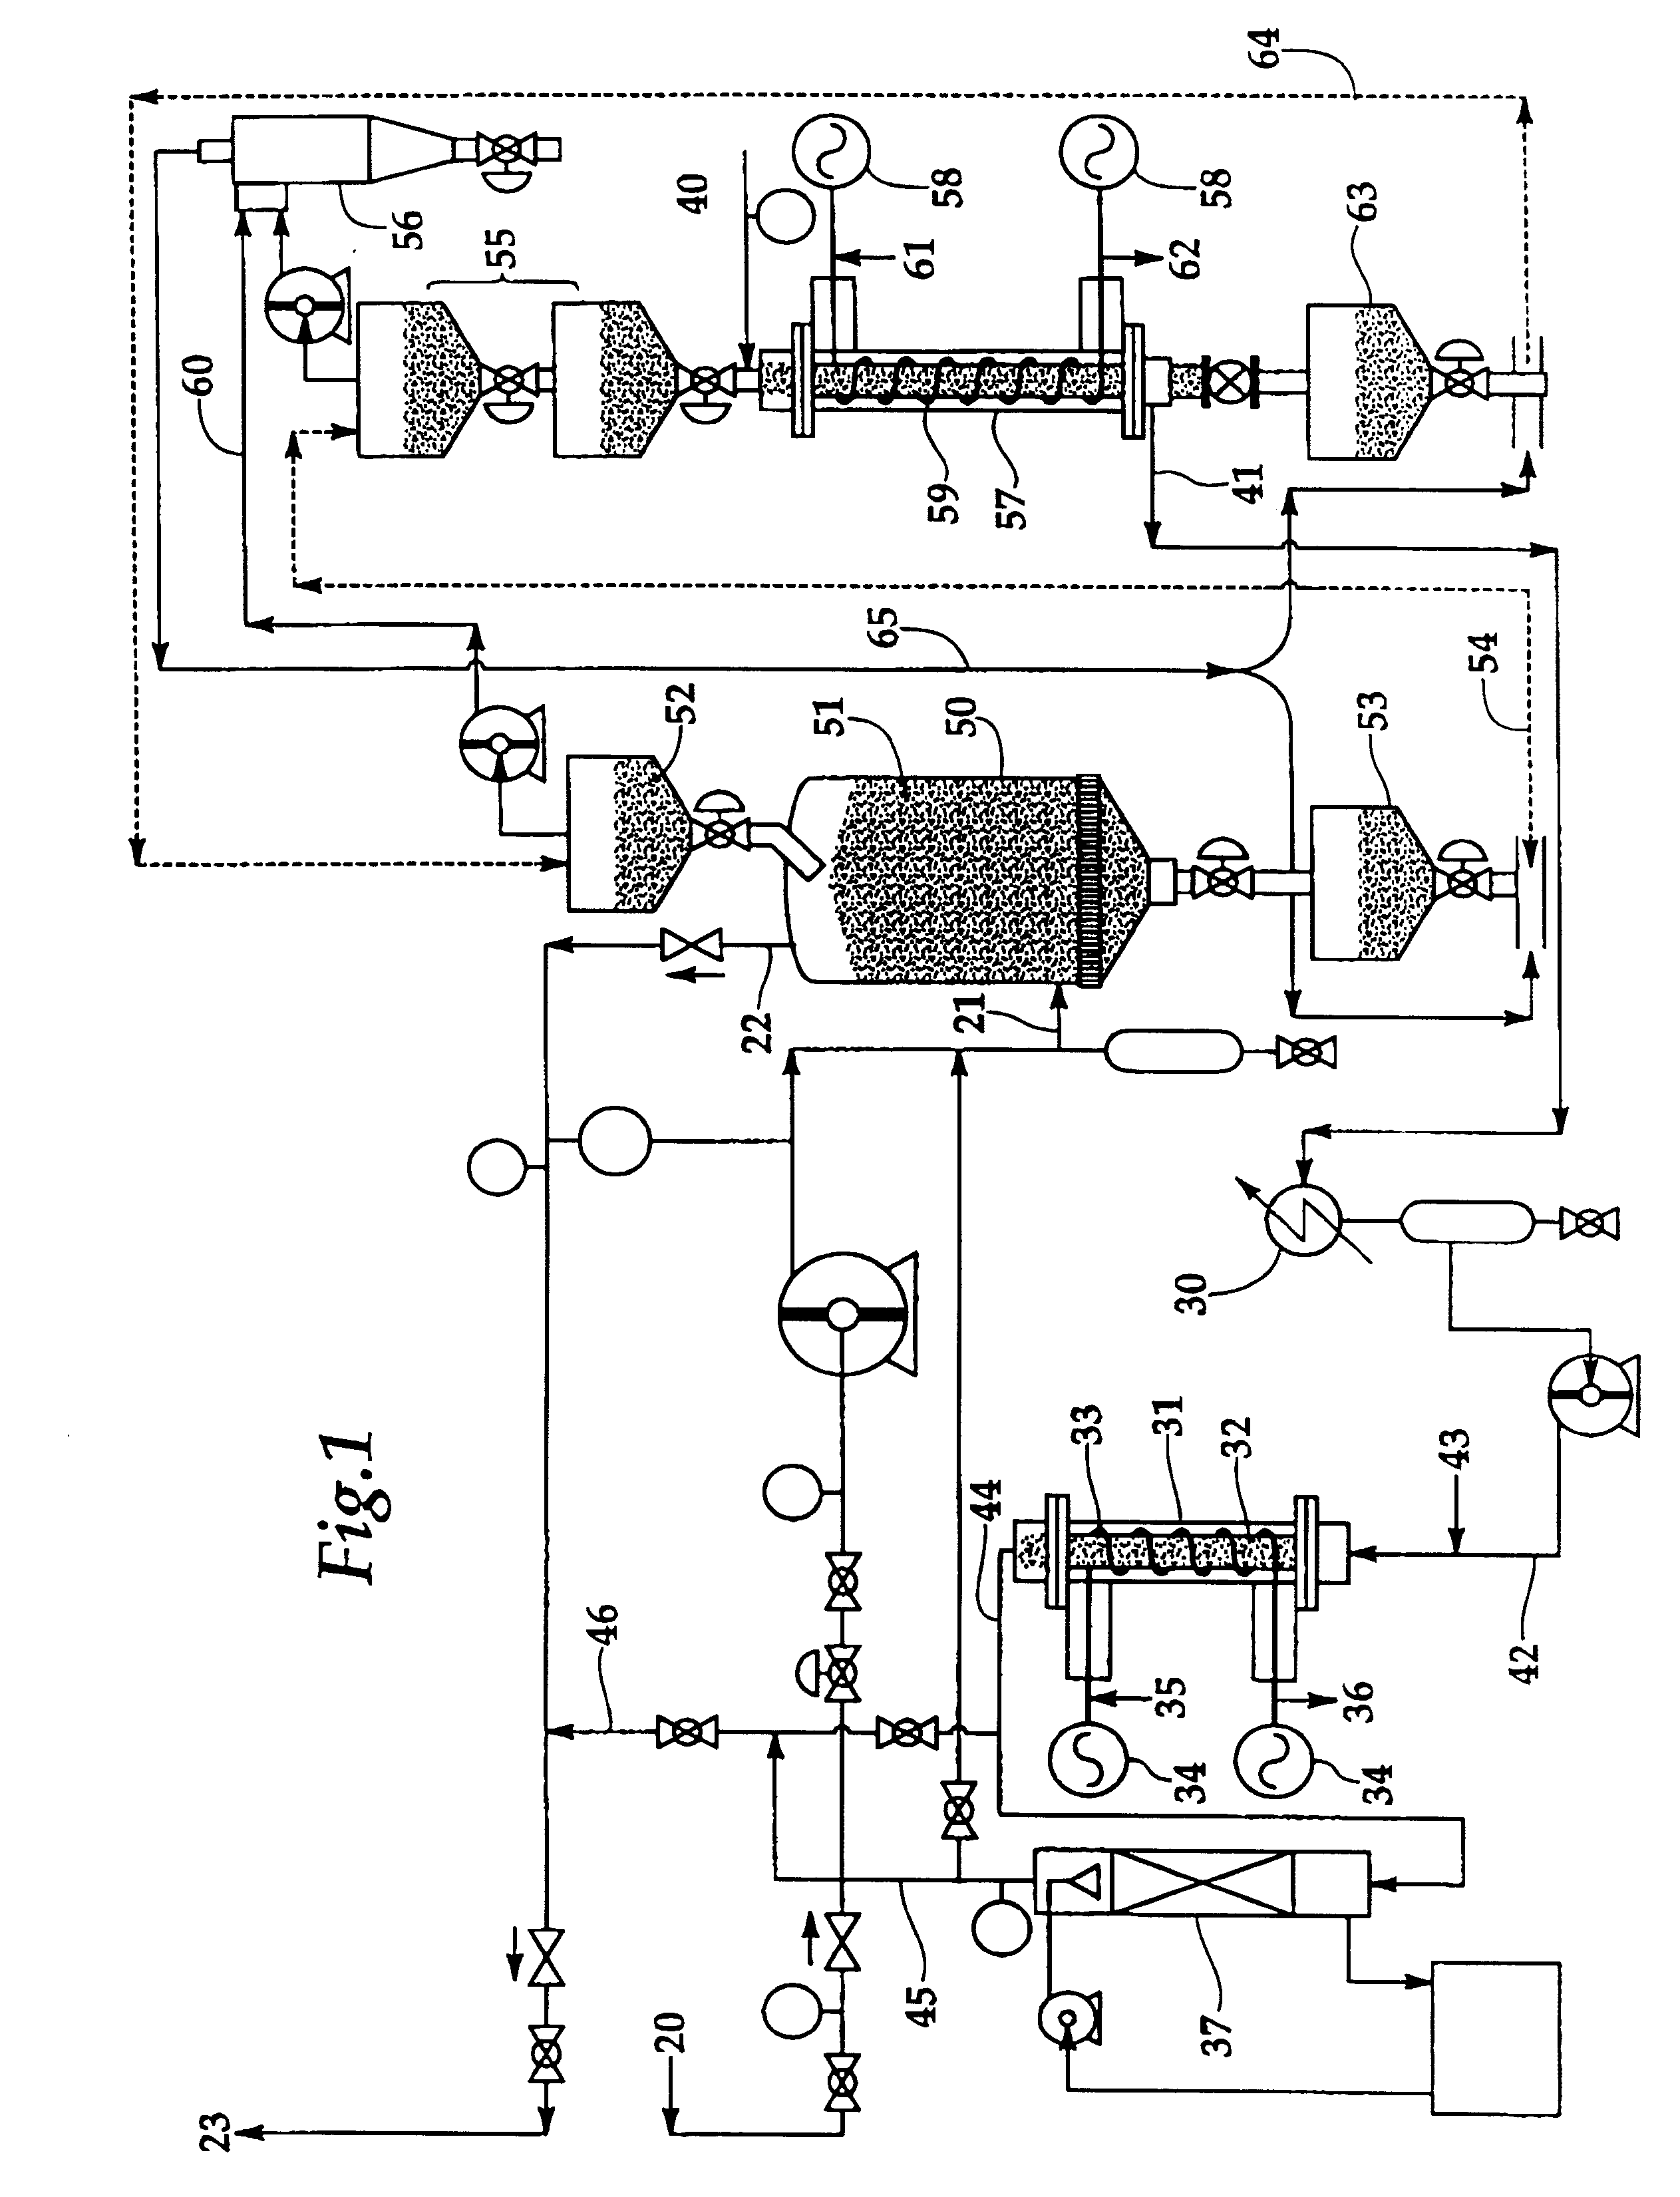 Process for microwave gas purification